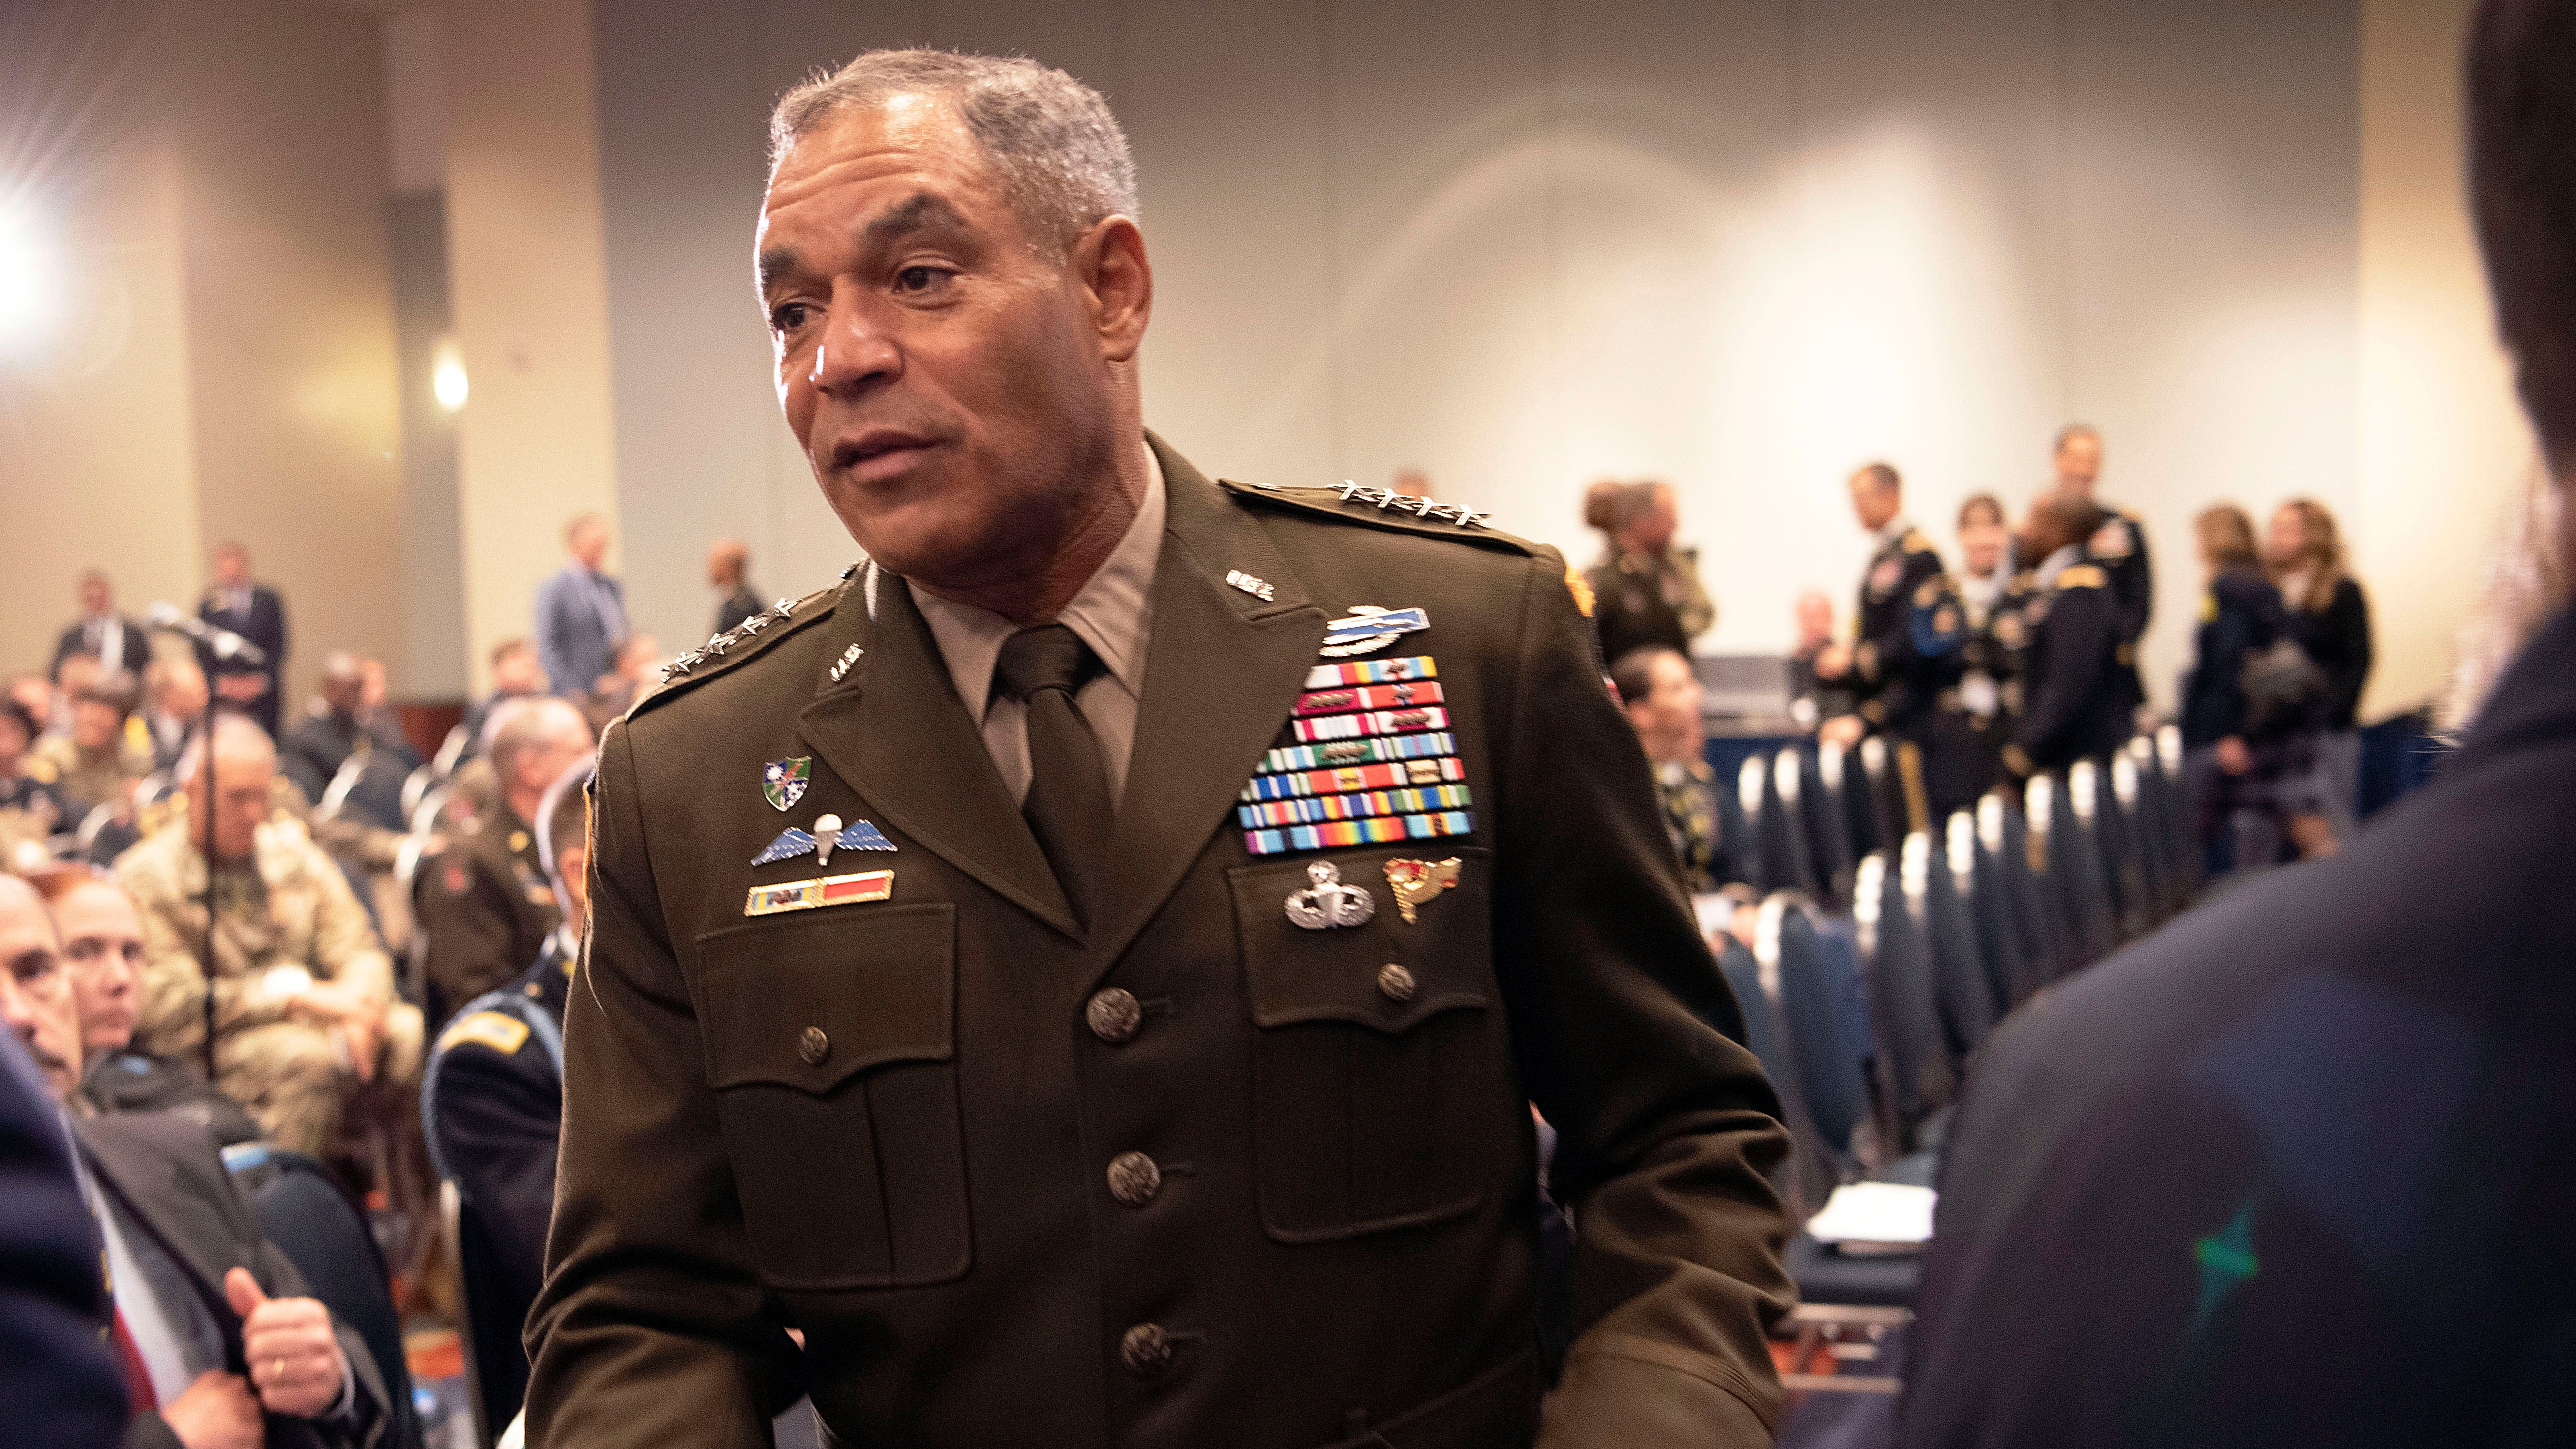 LTG Michael Garrett greets an attendee at the ILW Forum Readiness panel discussion at the 2019 AUSA Annual Meeting and Exposition at the Washington Convention Center on Oct. 14, 2019.